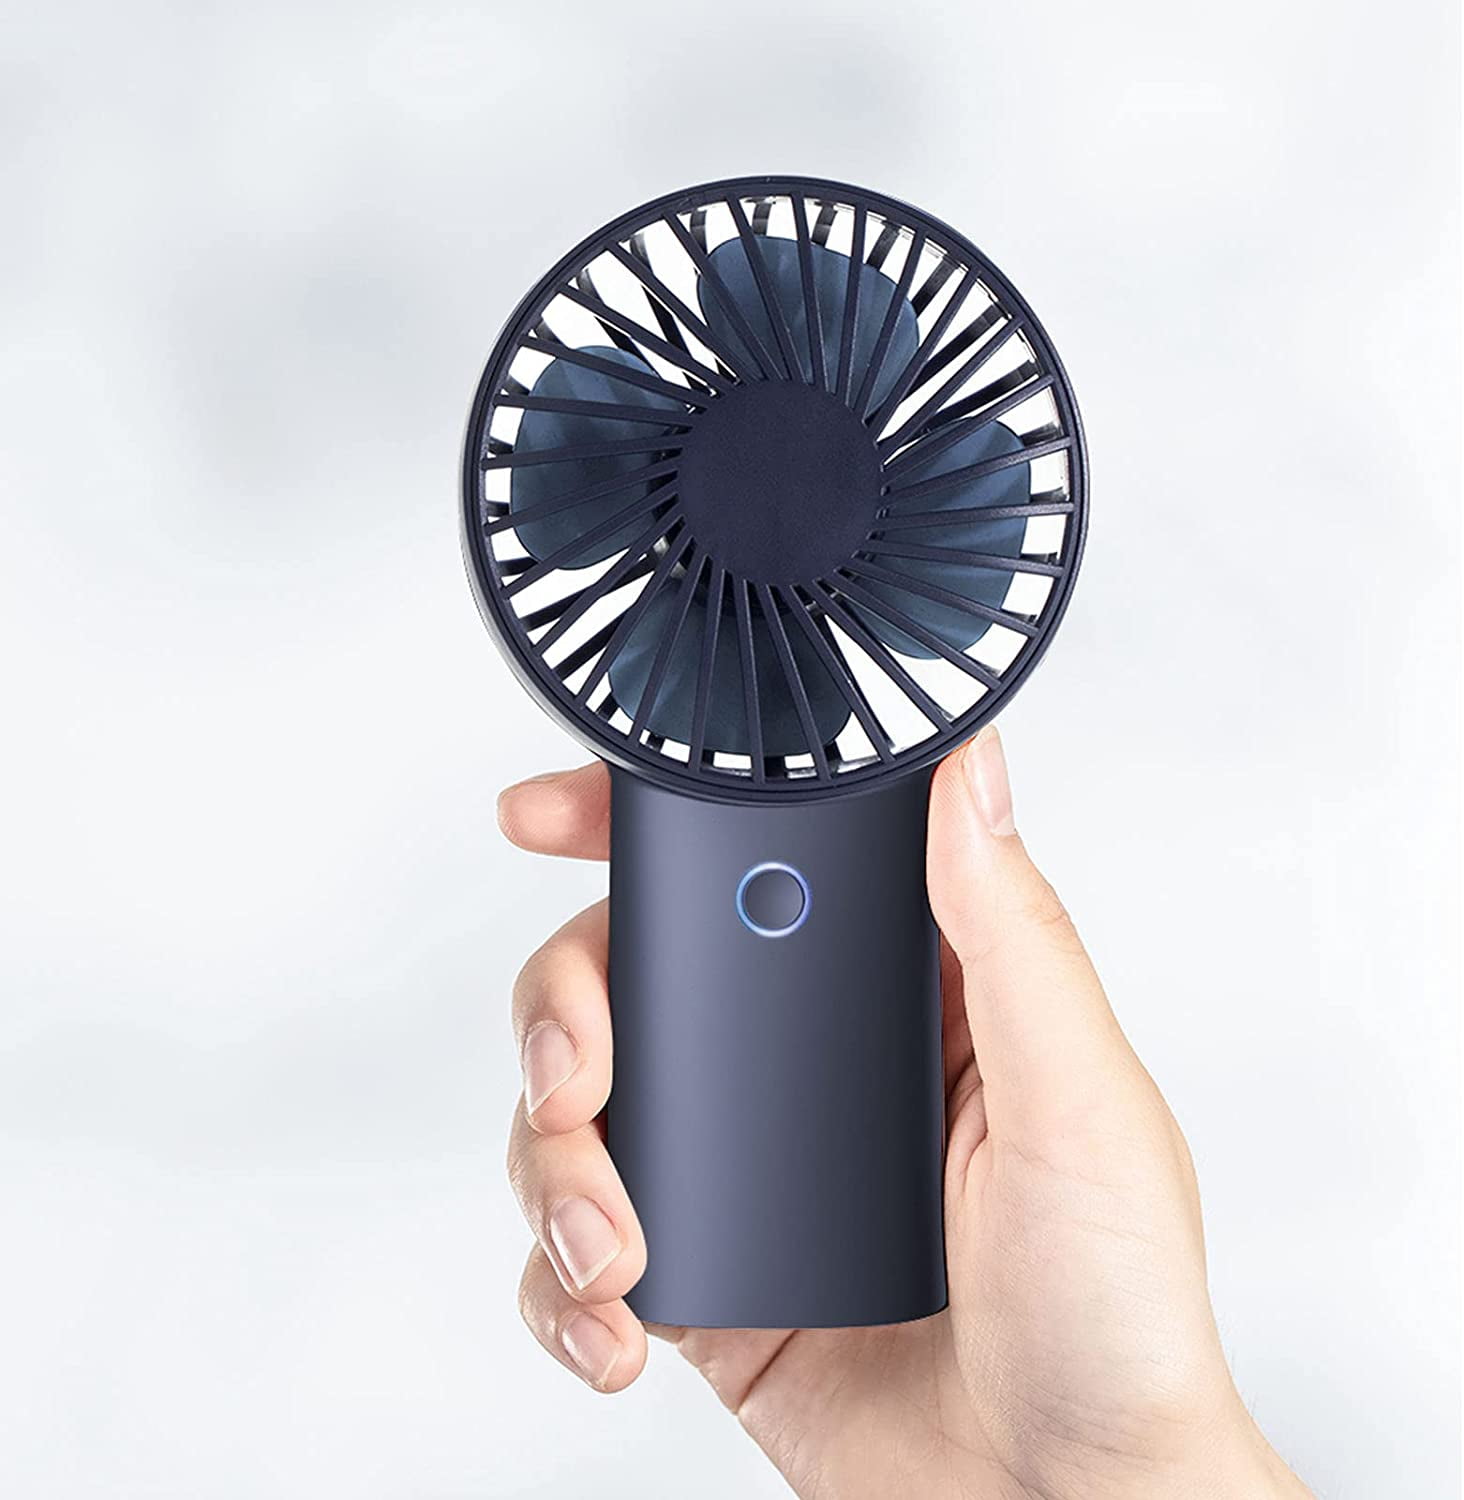 Portable Hand Fan USB Rechargeable Foldable Portable Mini Handheld Personal Portable Desk Stroller Table Fan Cooling Electric,B